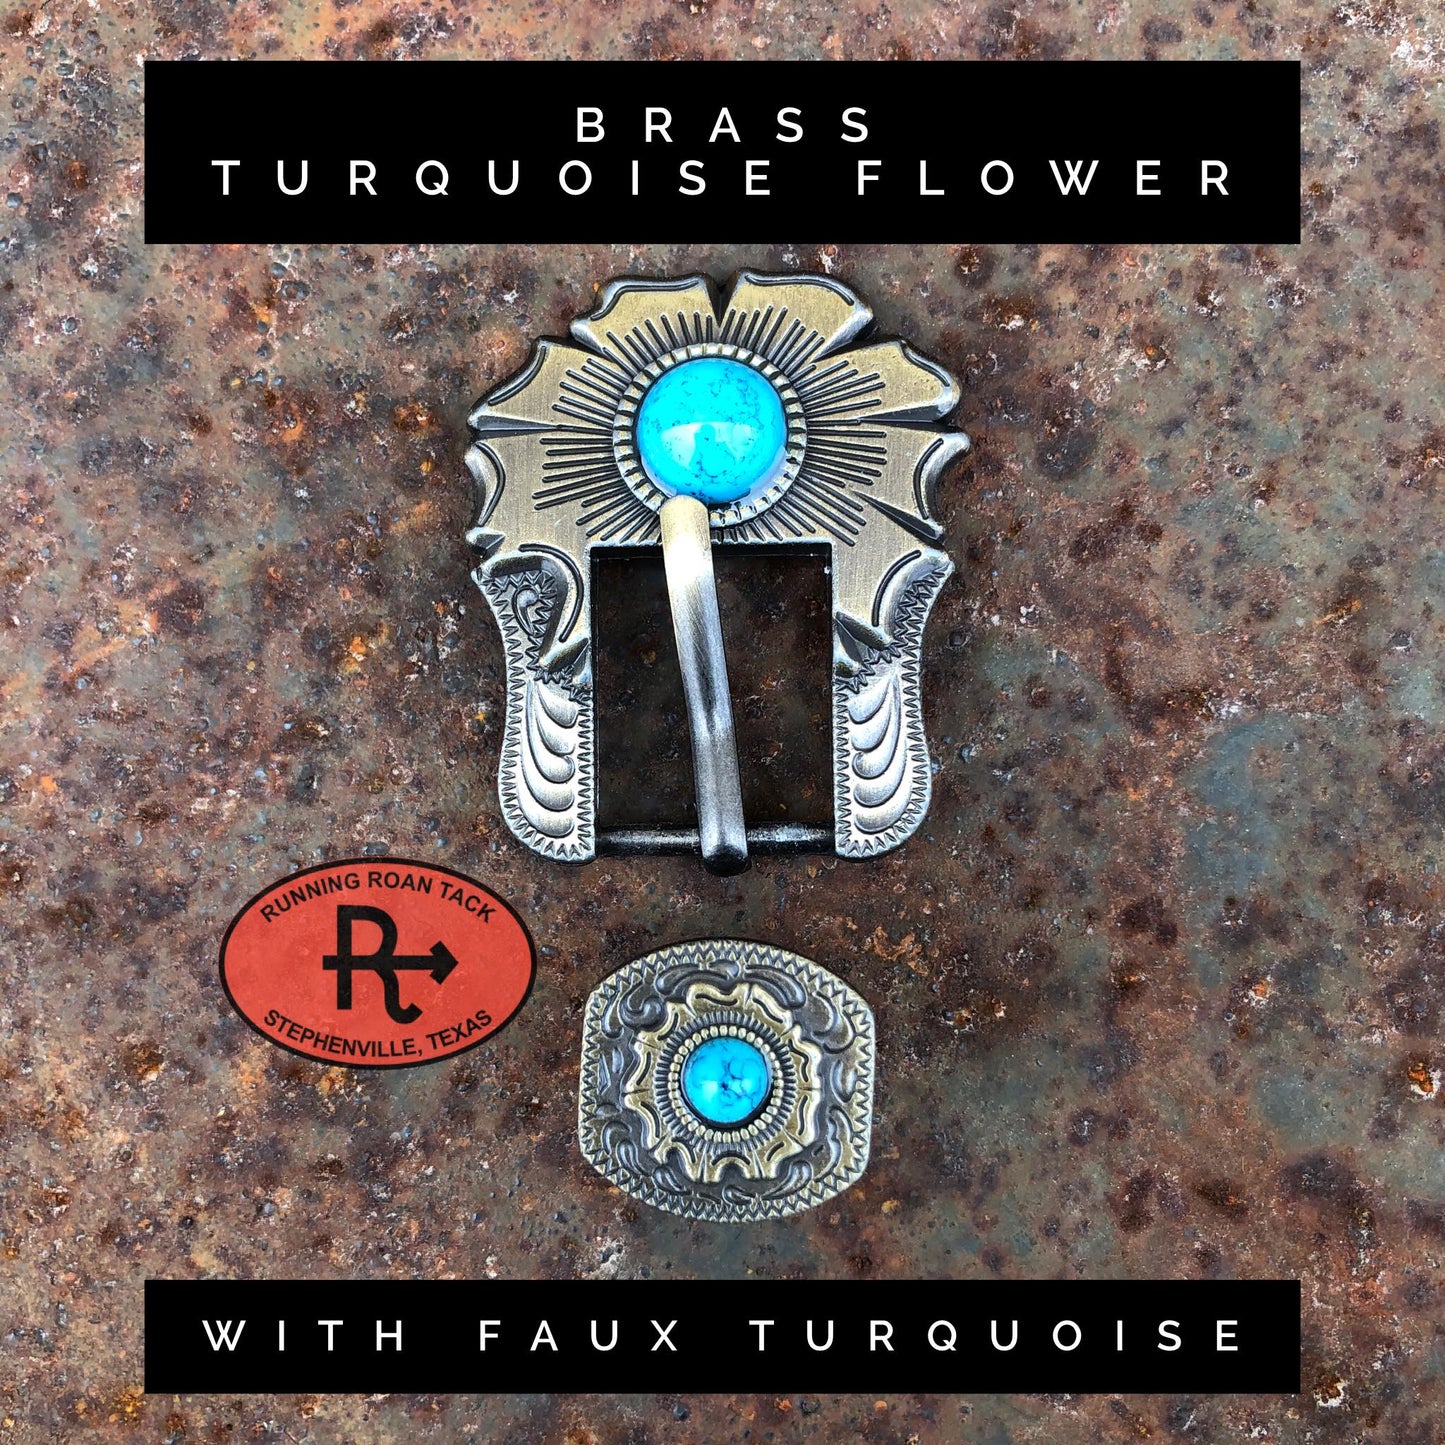 Turquoise Floral Buckaroo Spur Straps with Your Choice of Buckles